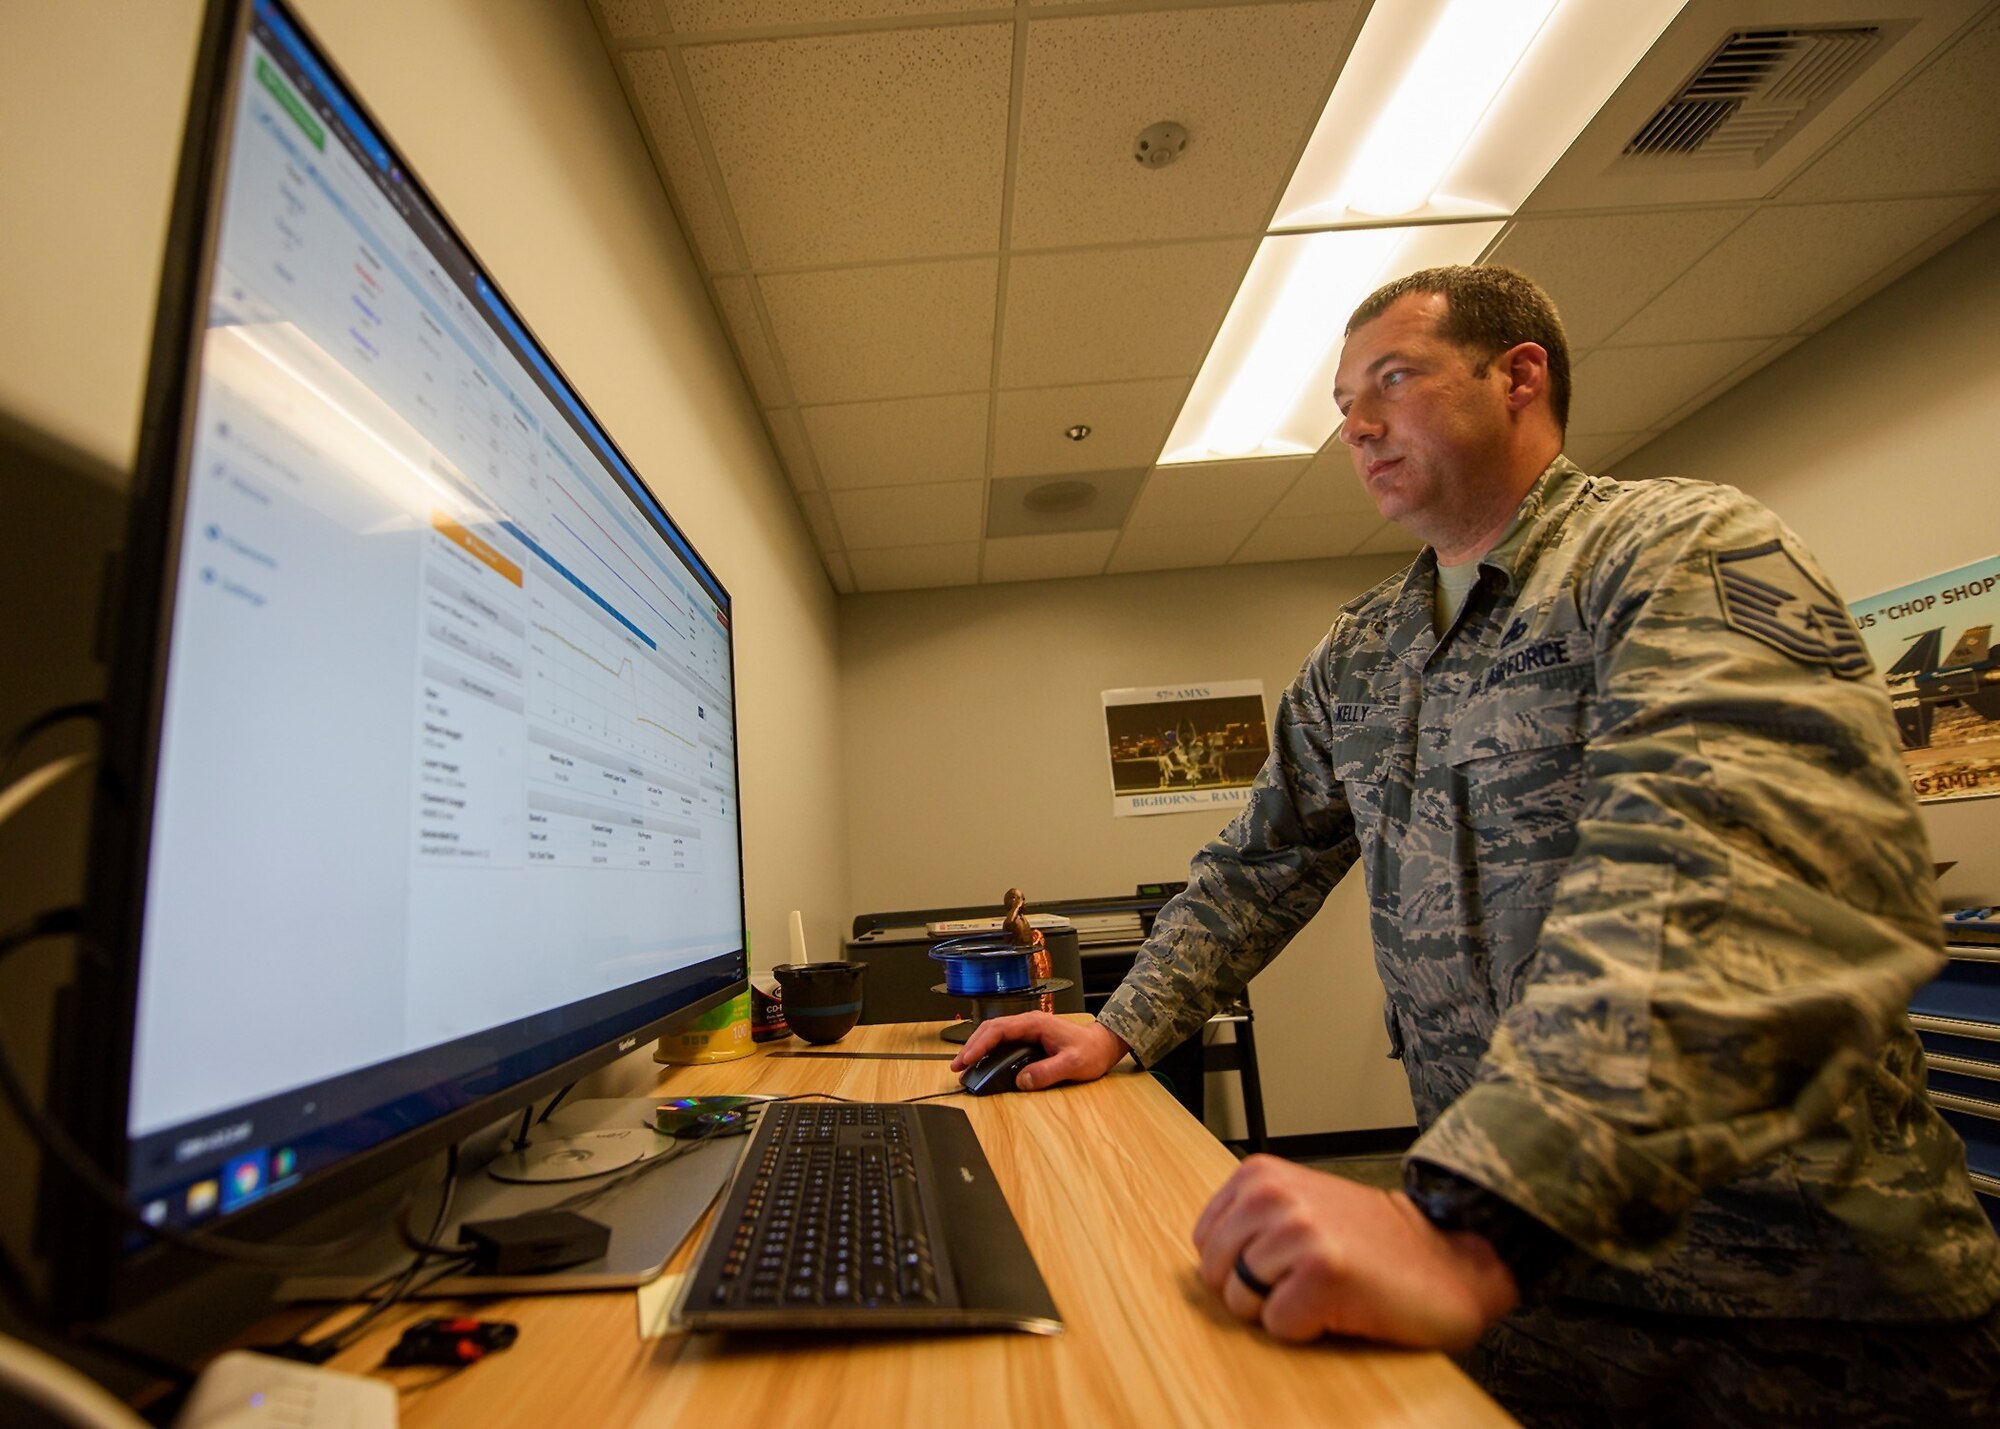 An Airman works on face shield software on a computer.